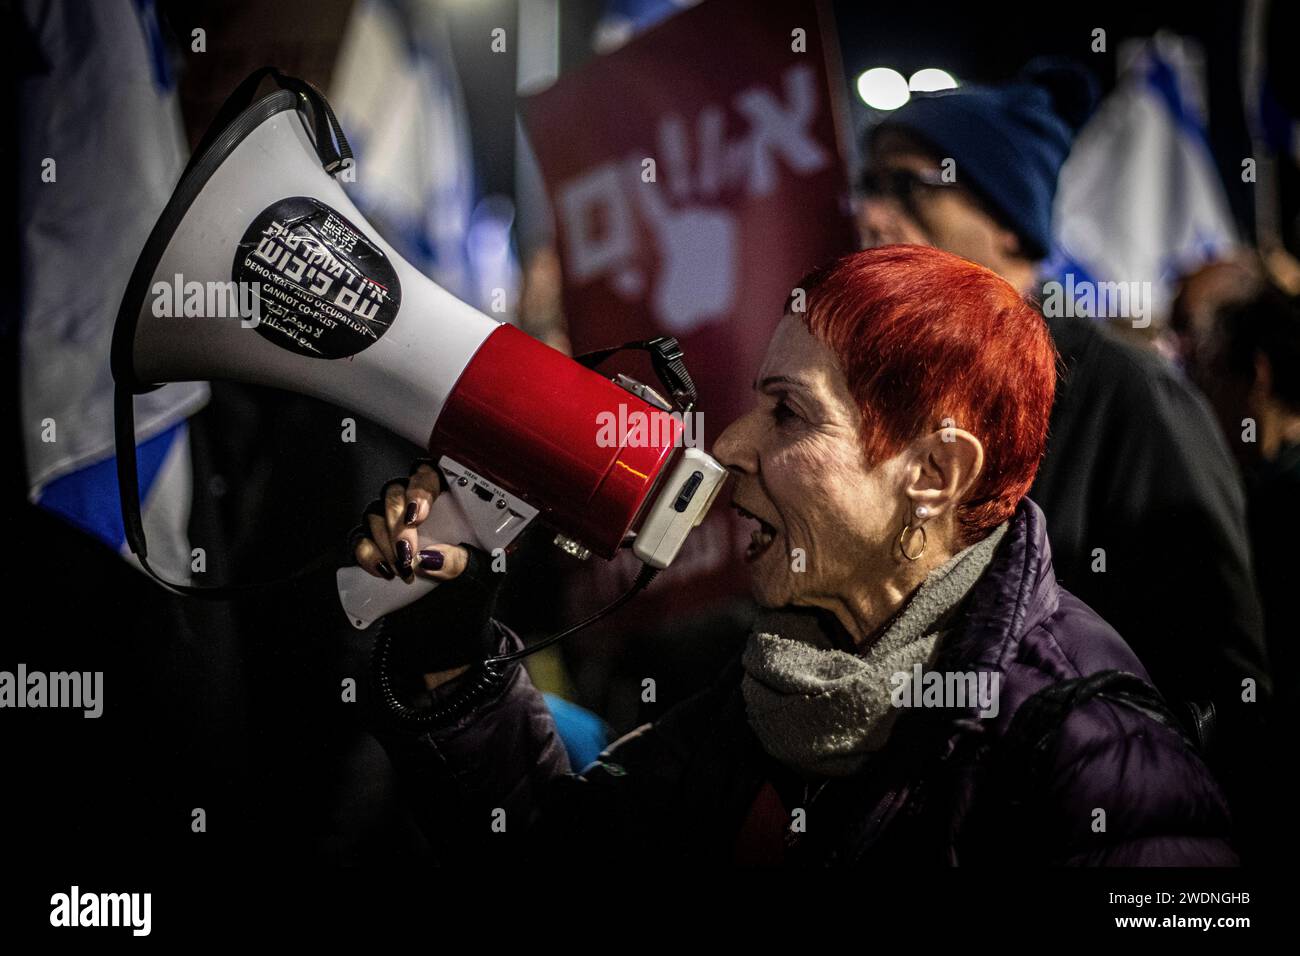 A woman chants slogans on a megaphone during a protest outside the home of Prime Minister Benjamin Netanyahu. The US, Egypt and Qatar are pushing Israel and Hamas to accept a comprehensive plan that would end the war, see the release of hostages held in Gaza, and ultimately lead to full normalization for Israel with its neighbors and talks for the establishment of a Palestinian state, The Wall Street Journal reported on Sunday. Stock Photo